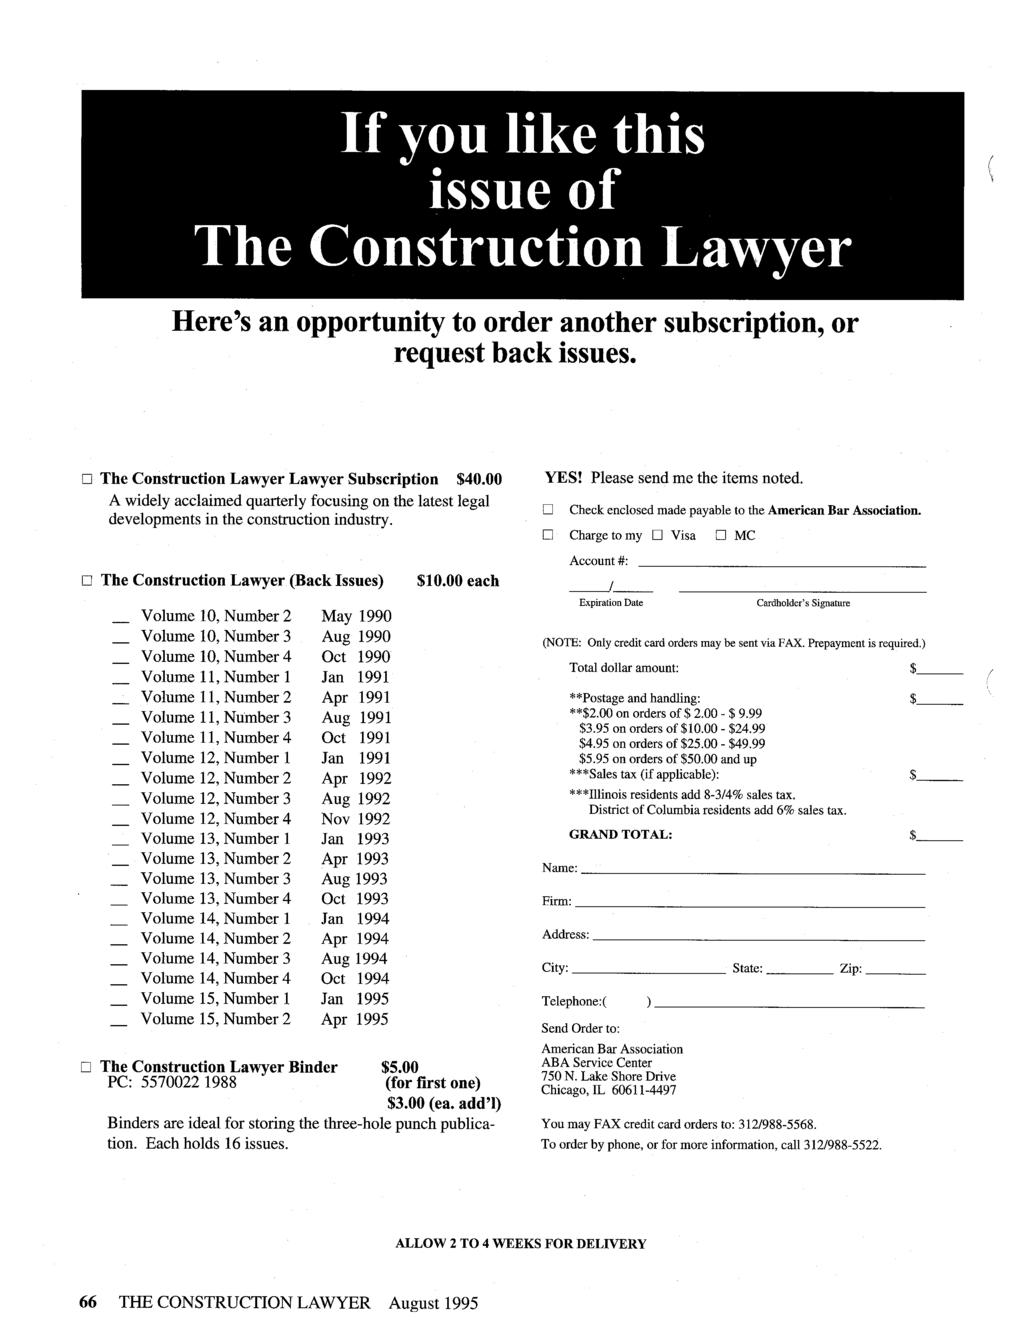 Here's an opportunity to order another subscription, or request back issues. I] The Construction Lawyer Lawyer Subscription $40.